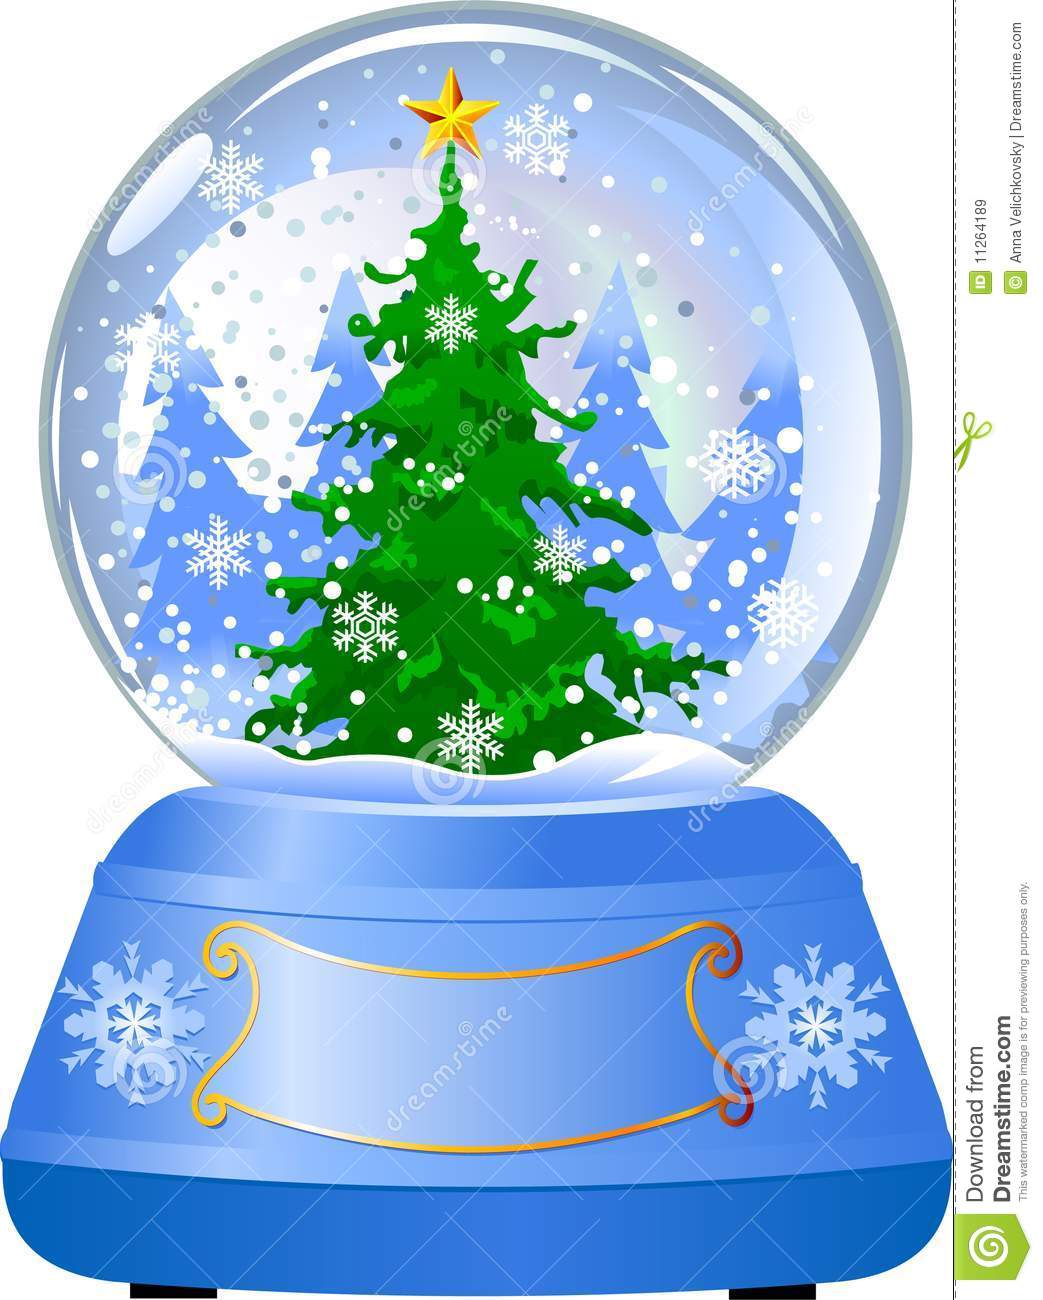 Snow Globe Animated Wallpaper Pictures